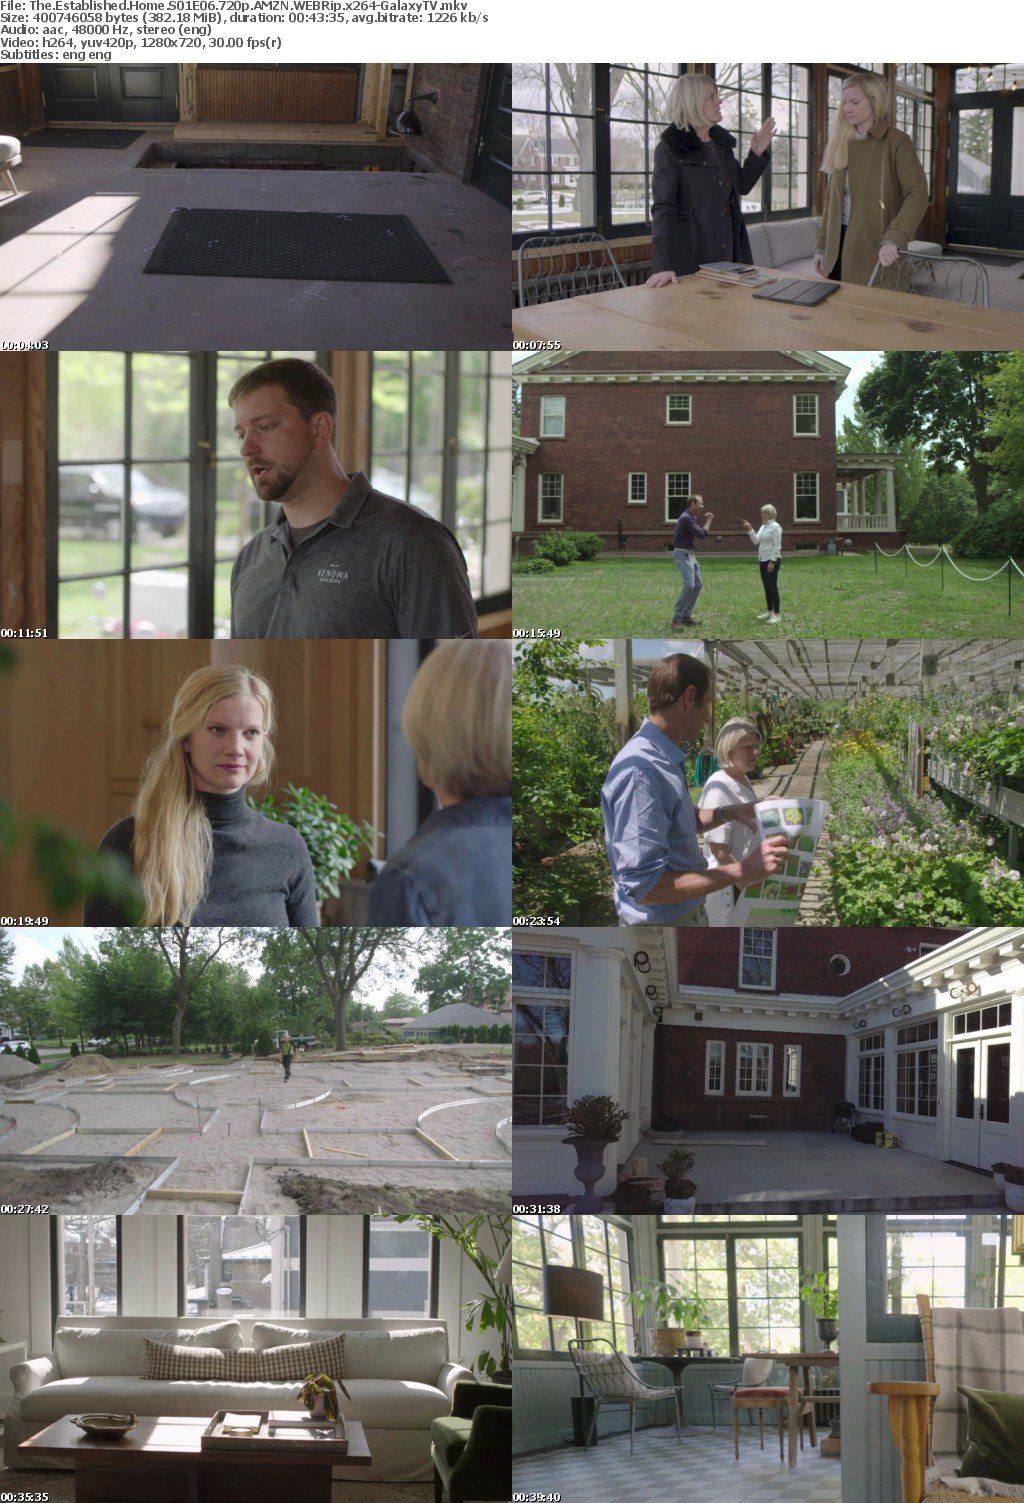 The Established Home S01 COMPLETE 720p AMZN WEBRip x264-GalaxyTV